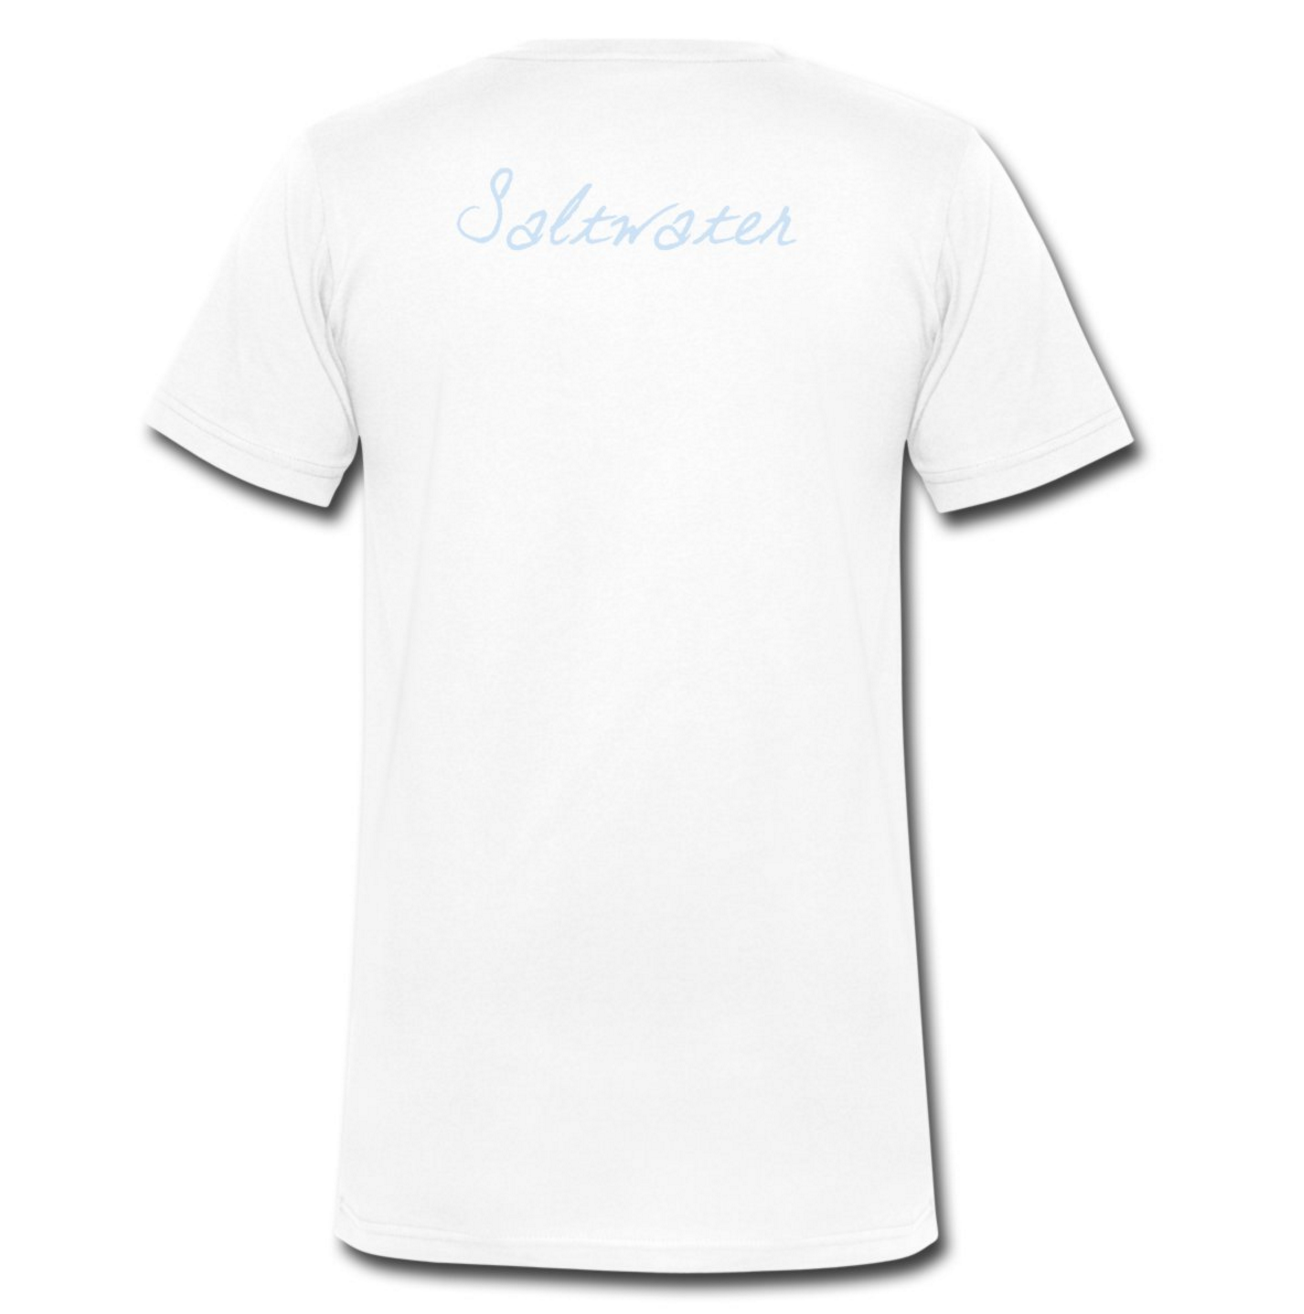 Saltwater 25th Anniversary T-Shirt Male White - Limited Edition